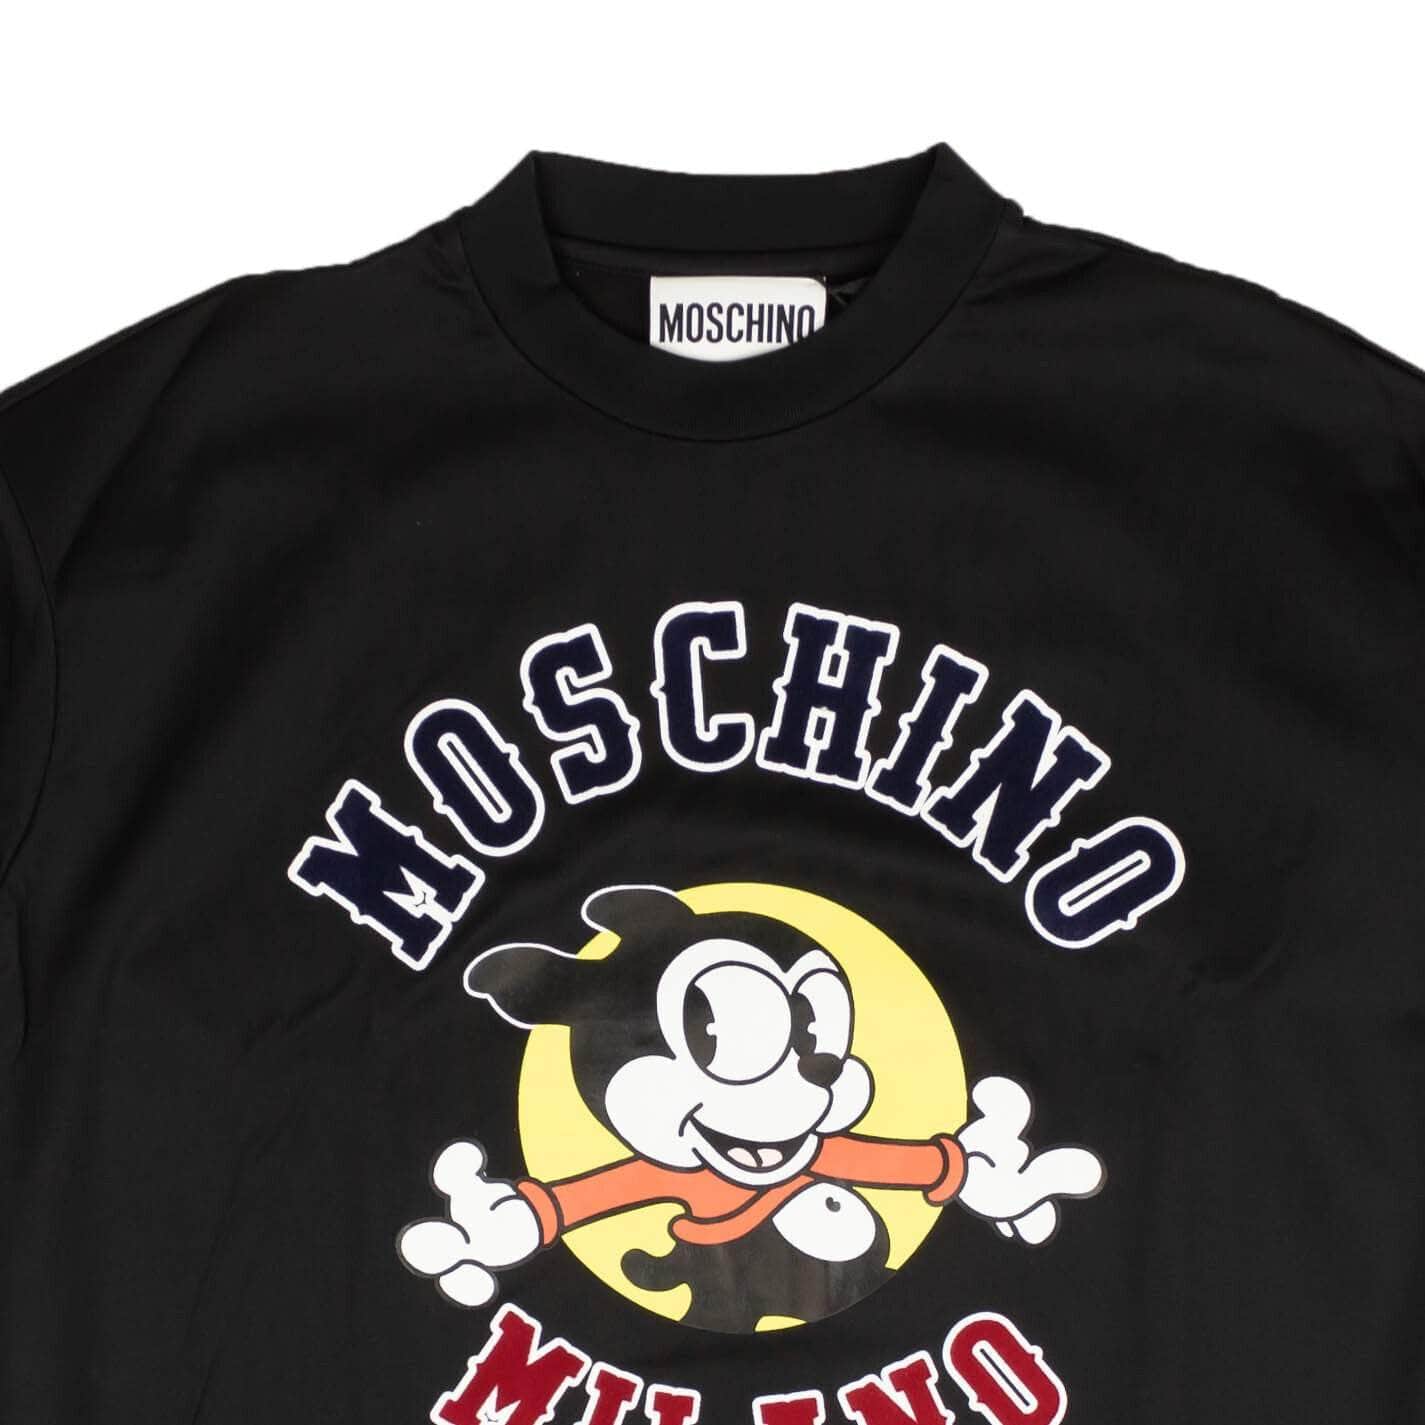 Moschino Couture channelenable-all, chicmi, couponcollection, gender-womens, main-clothing, moschino-couture, size-42, size-44, size-48, under-250, womens-hoodies-sweatshirts Black Crewneck Logo Sweatshirt Dress